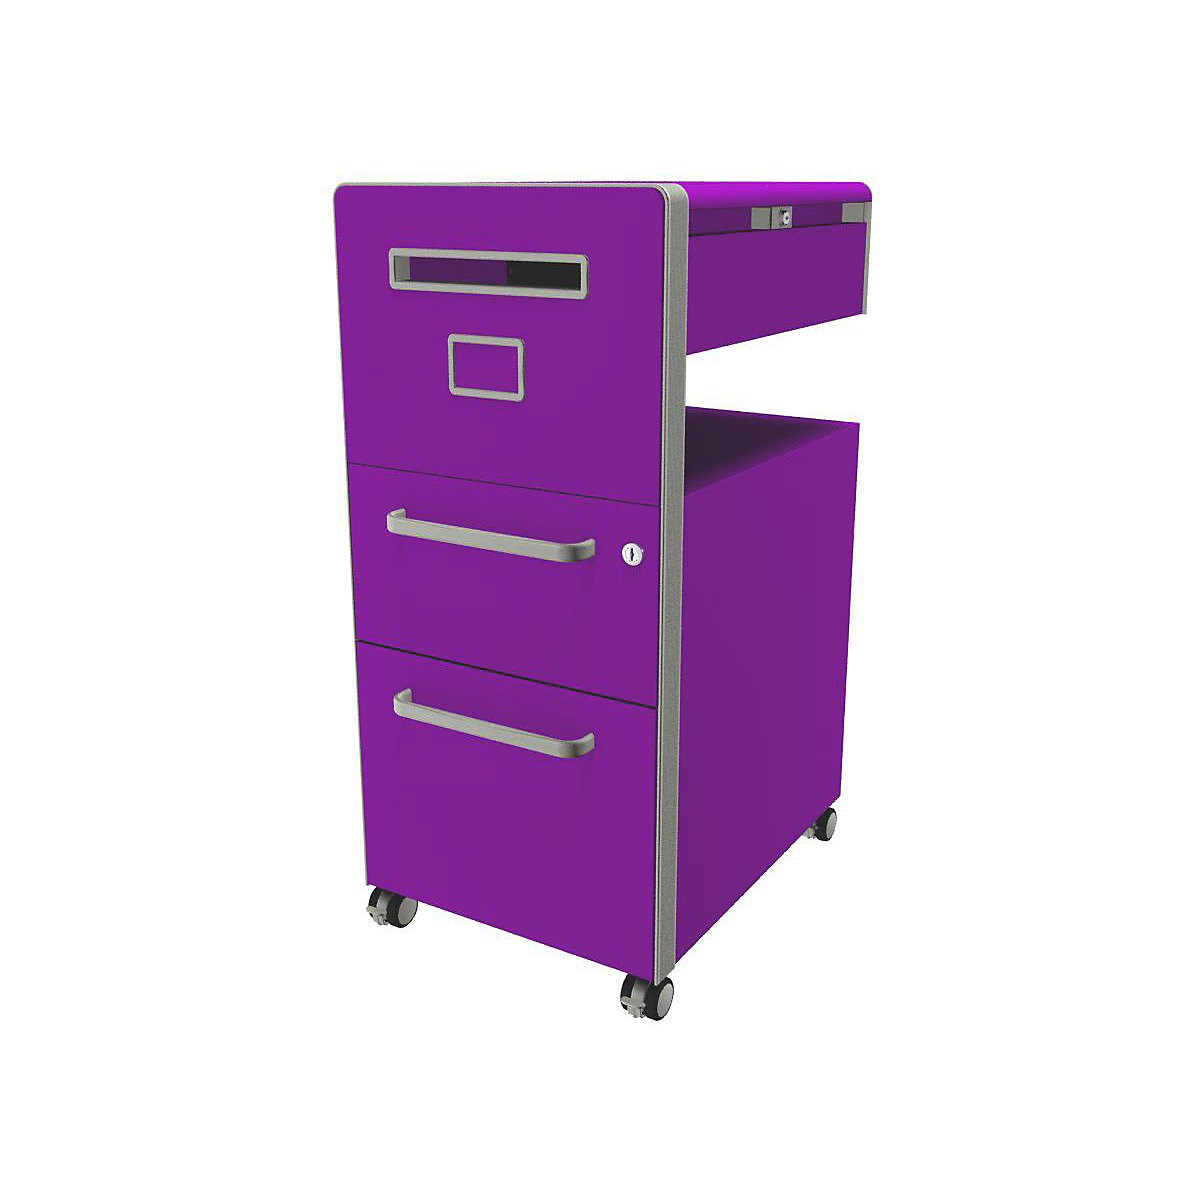 Bite™ pedestal furniture, with 1 pin board, opens on the left side – BISLEY, with 1 universal drawer, 1 suspension file drawer, fuchsia-30